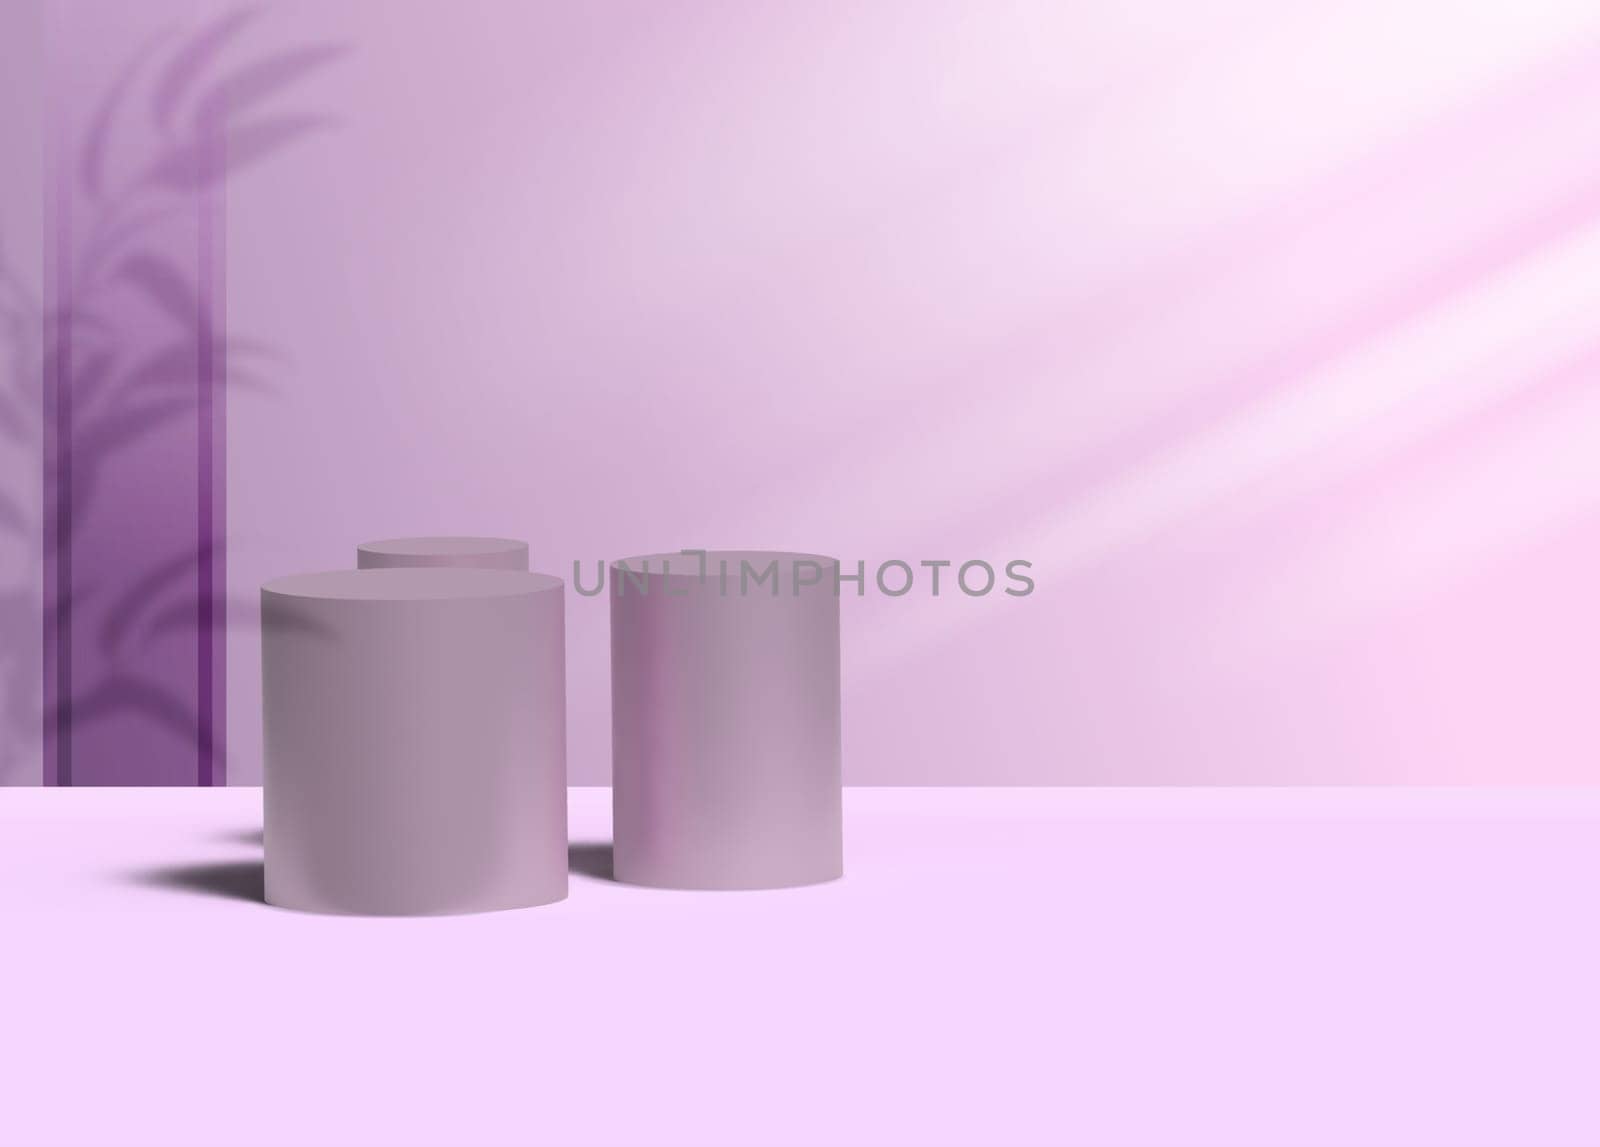 Round podiums for displaying cosmetics and products on a purple background with shadow, 3D rendering illustration by ndanko